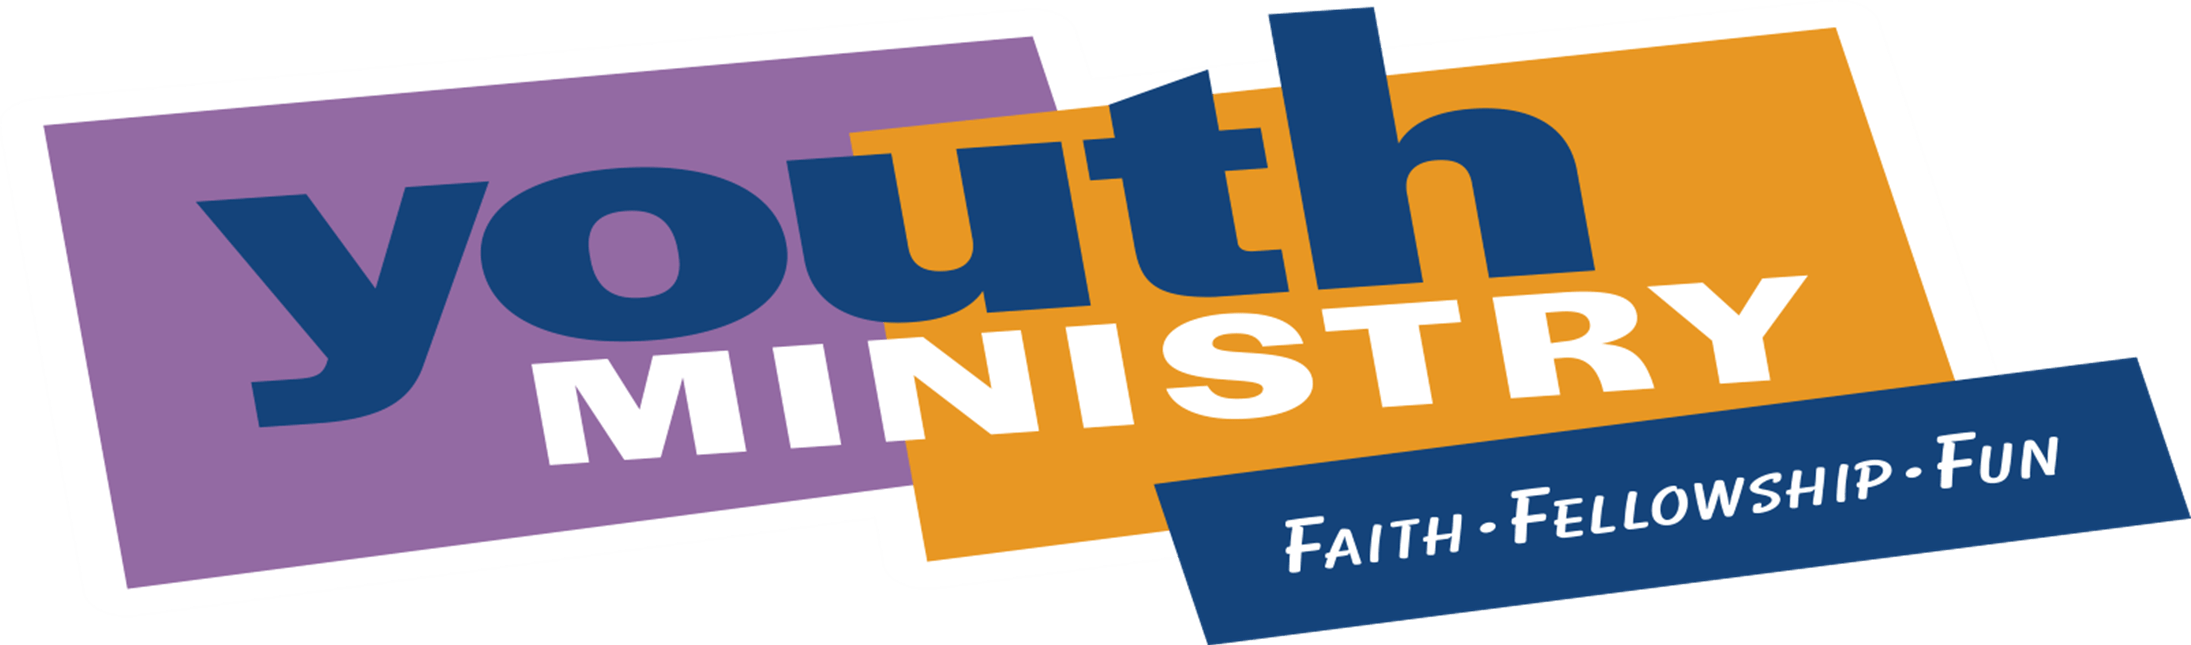 Youth Ministry - Hope United Methodist Church